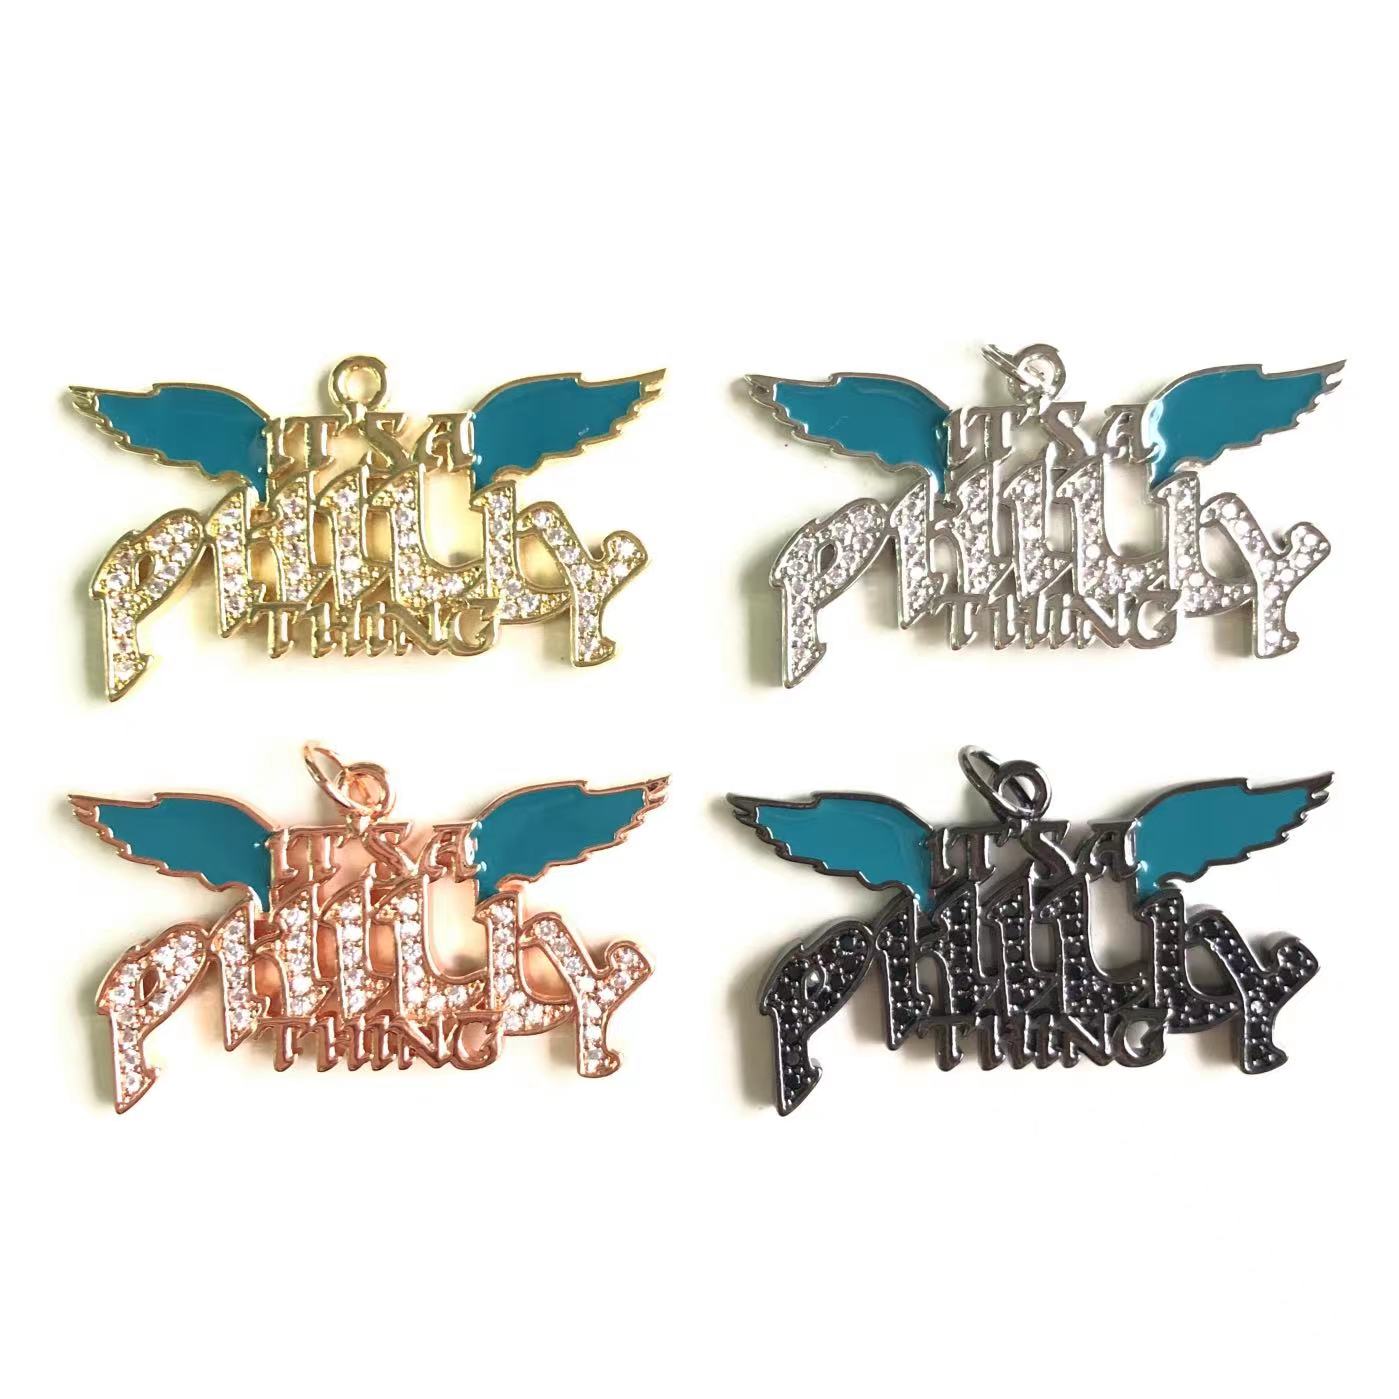 10pcs/lot CZ Paved "It is a Philly Thing" Word Philadelphia Eagles Charms Mix Colors CZ Paved Charms American Football Sports New Charms Arrivals Charms Beads Beyond